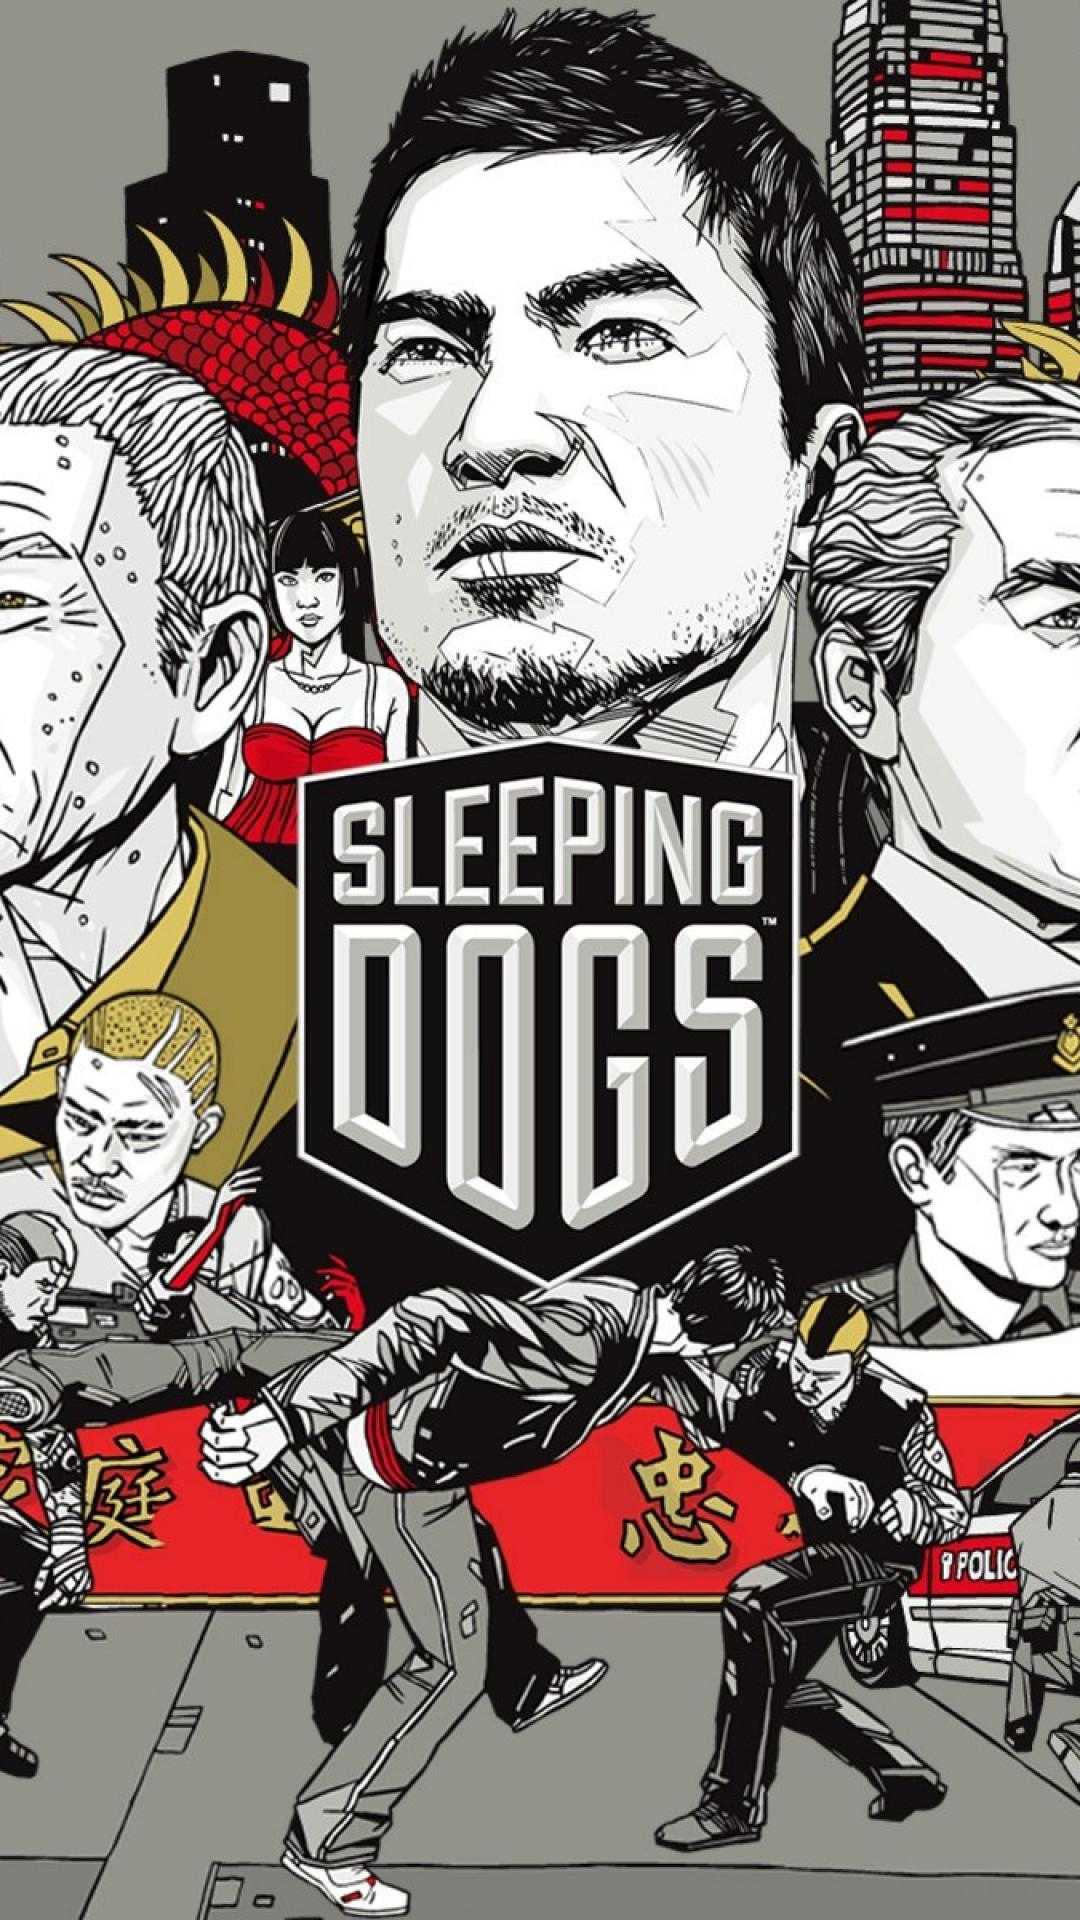 android sleeping dogs background